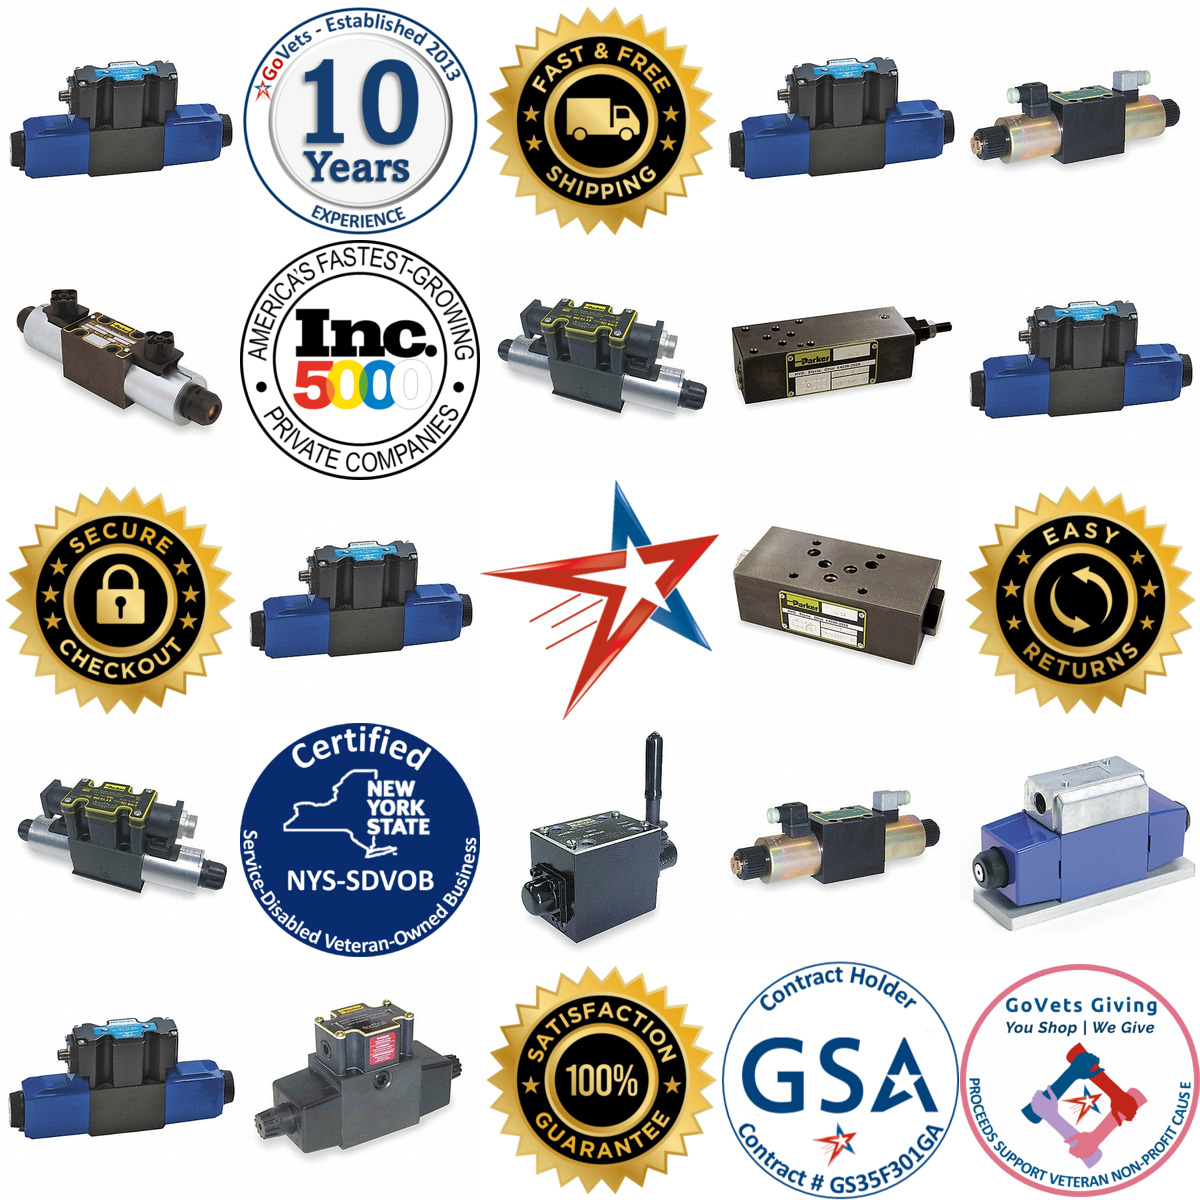 A selection of Hydraulic Manifold Valves products on GoVets